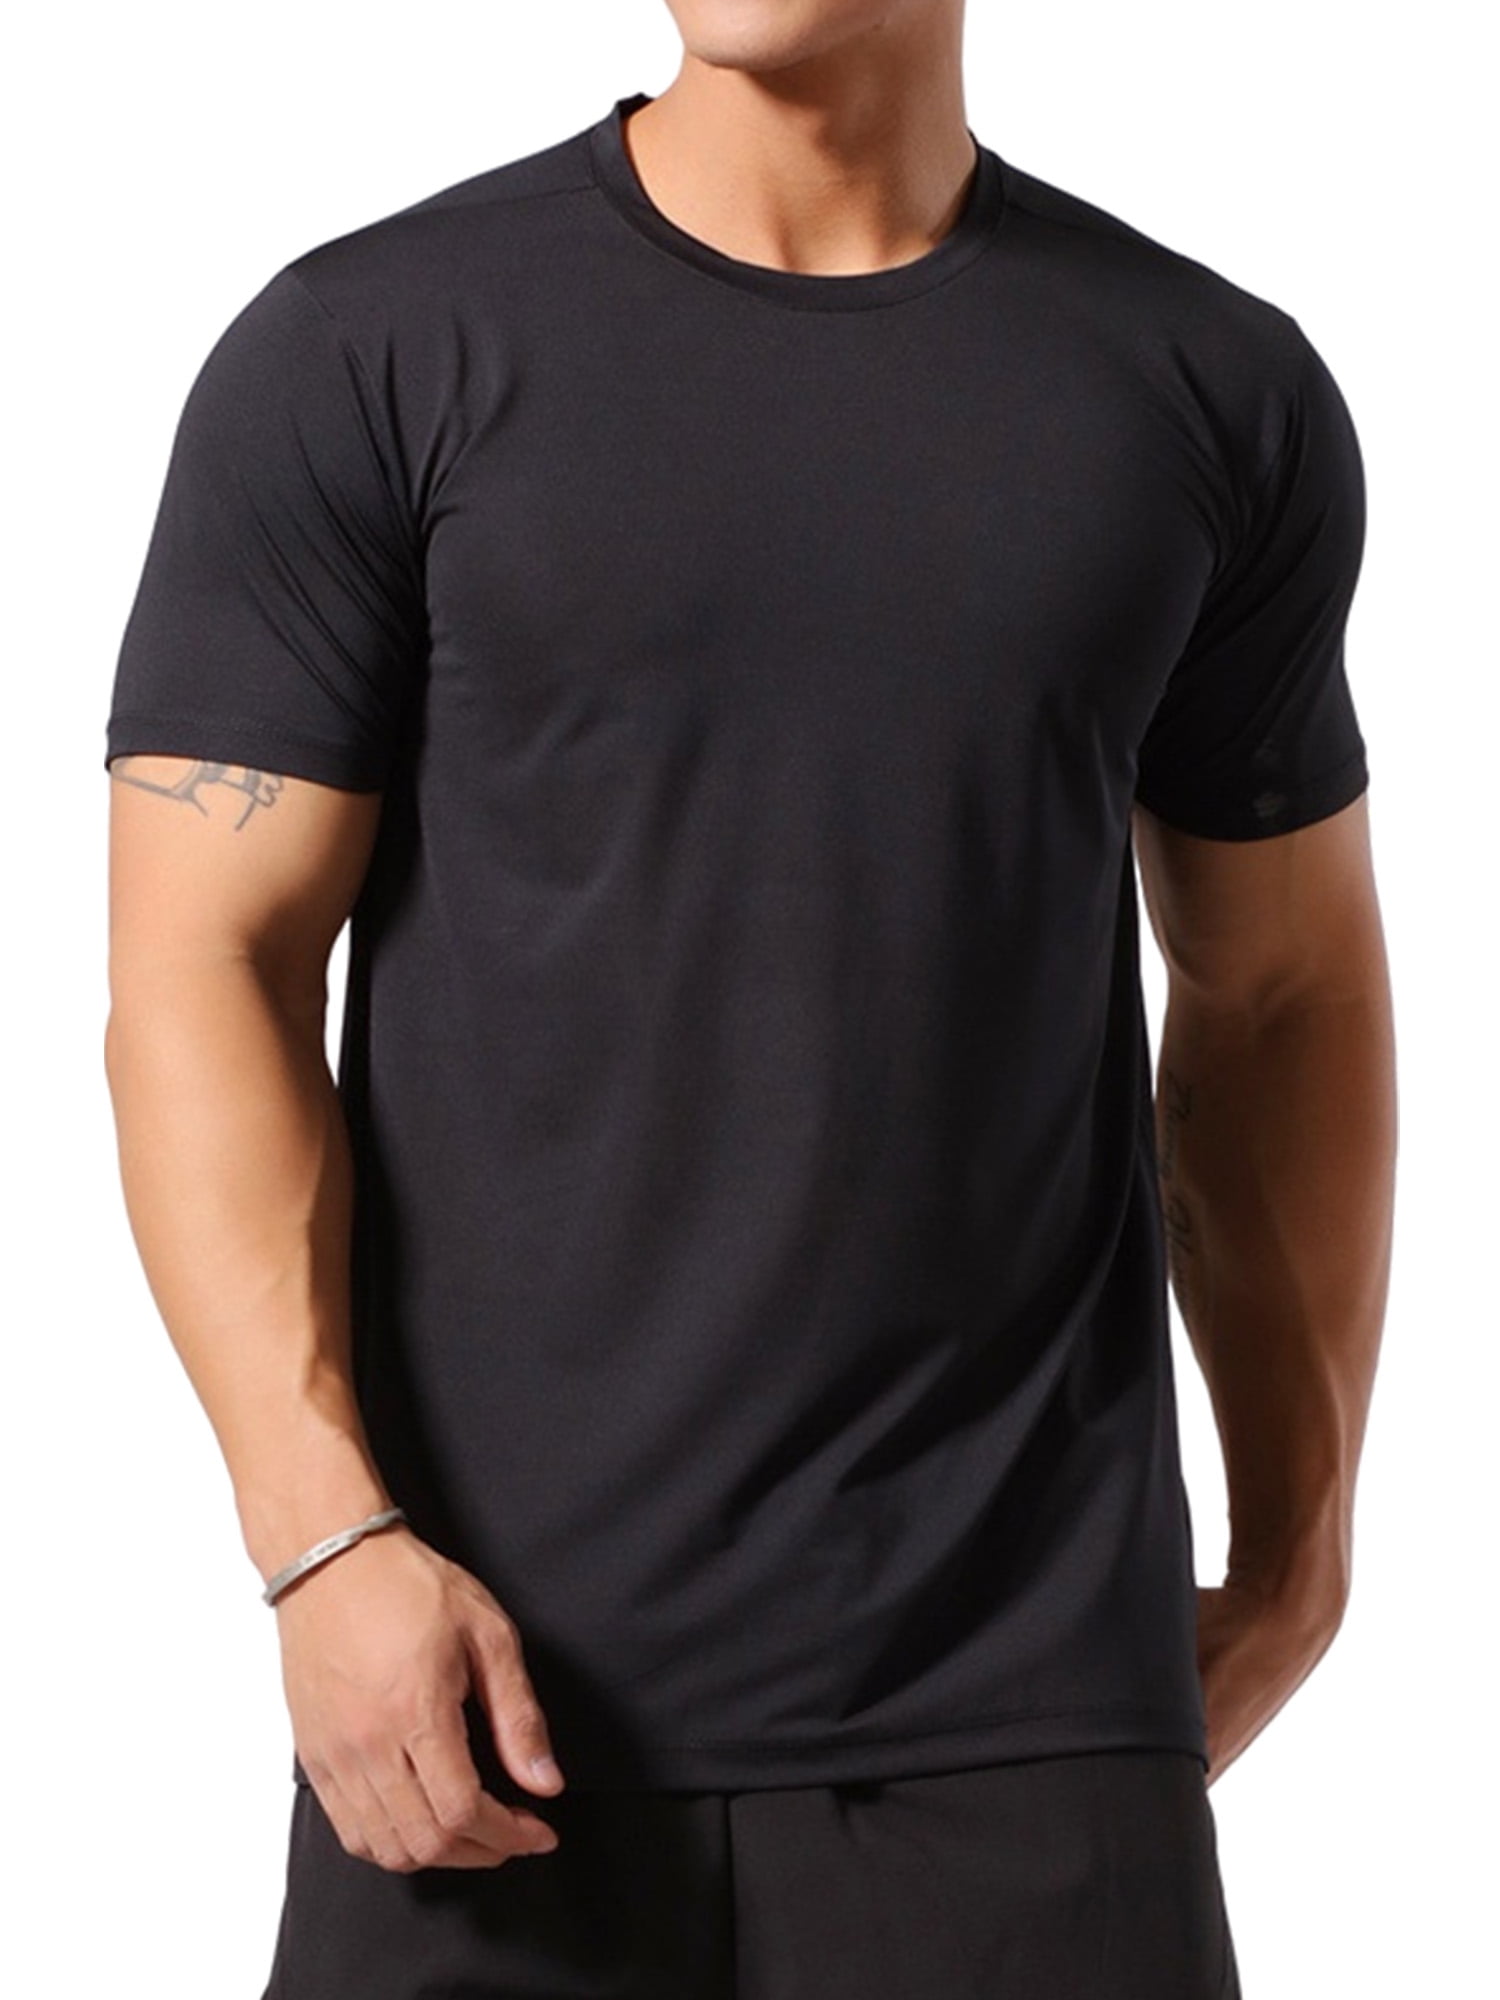 Details about   Mens Comfortable Fitness SPORTS Casual Tops Tees 